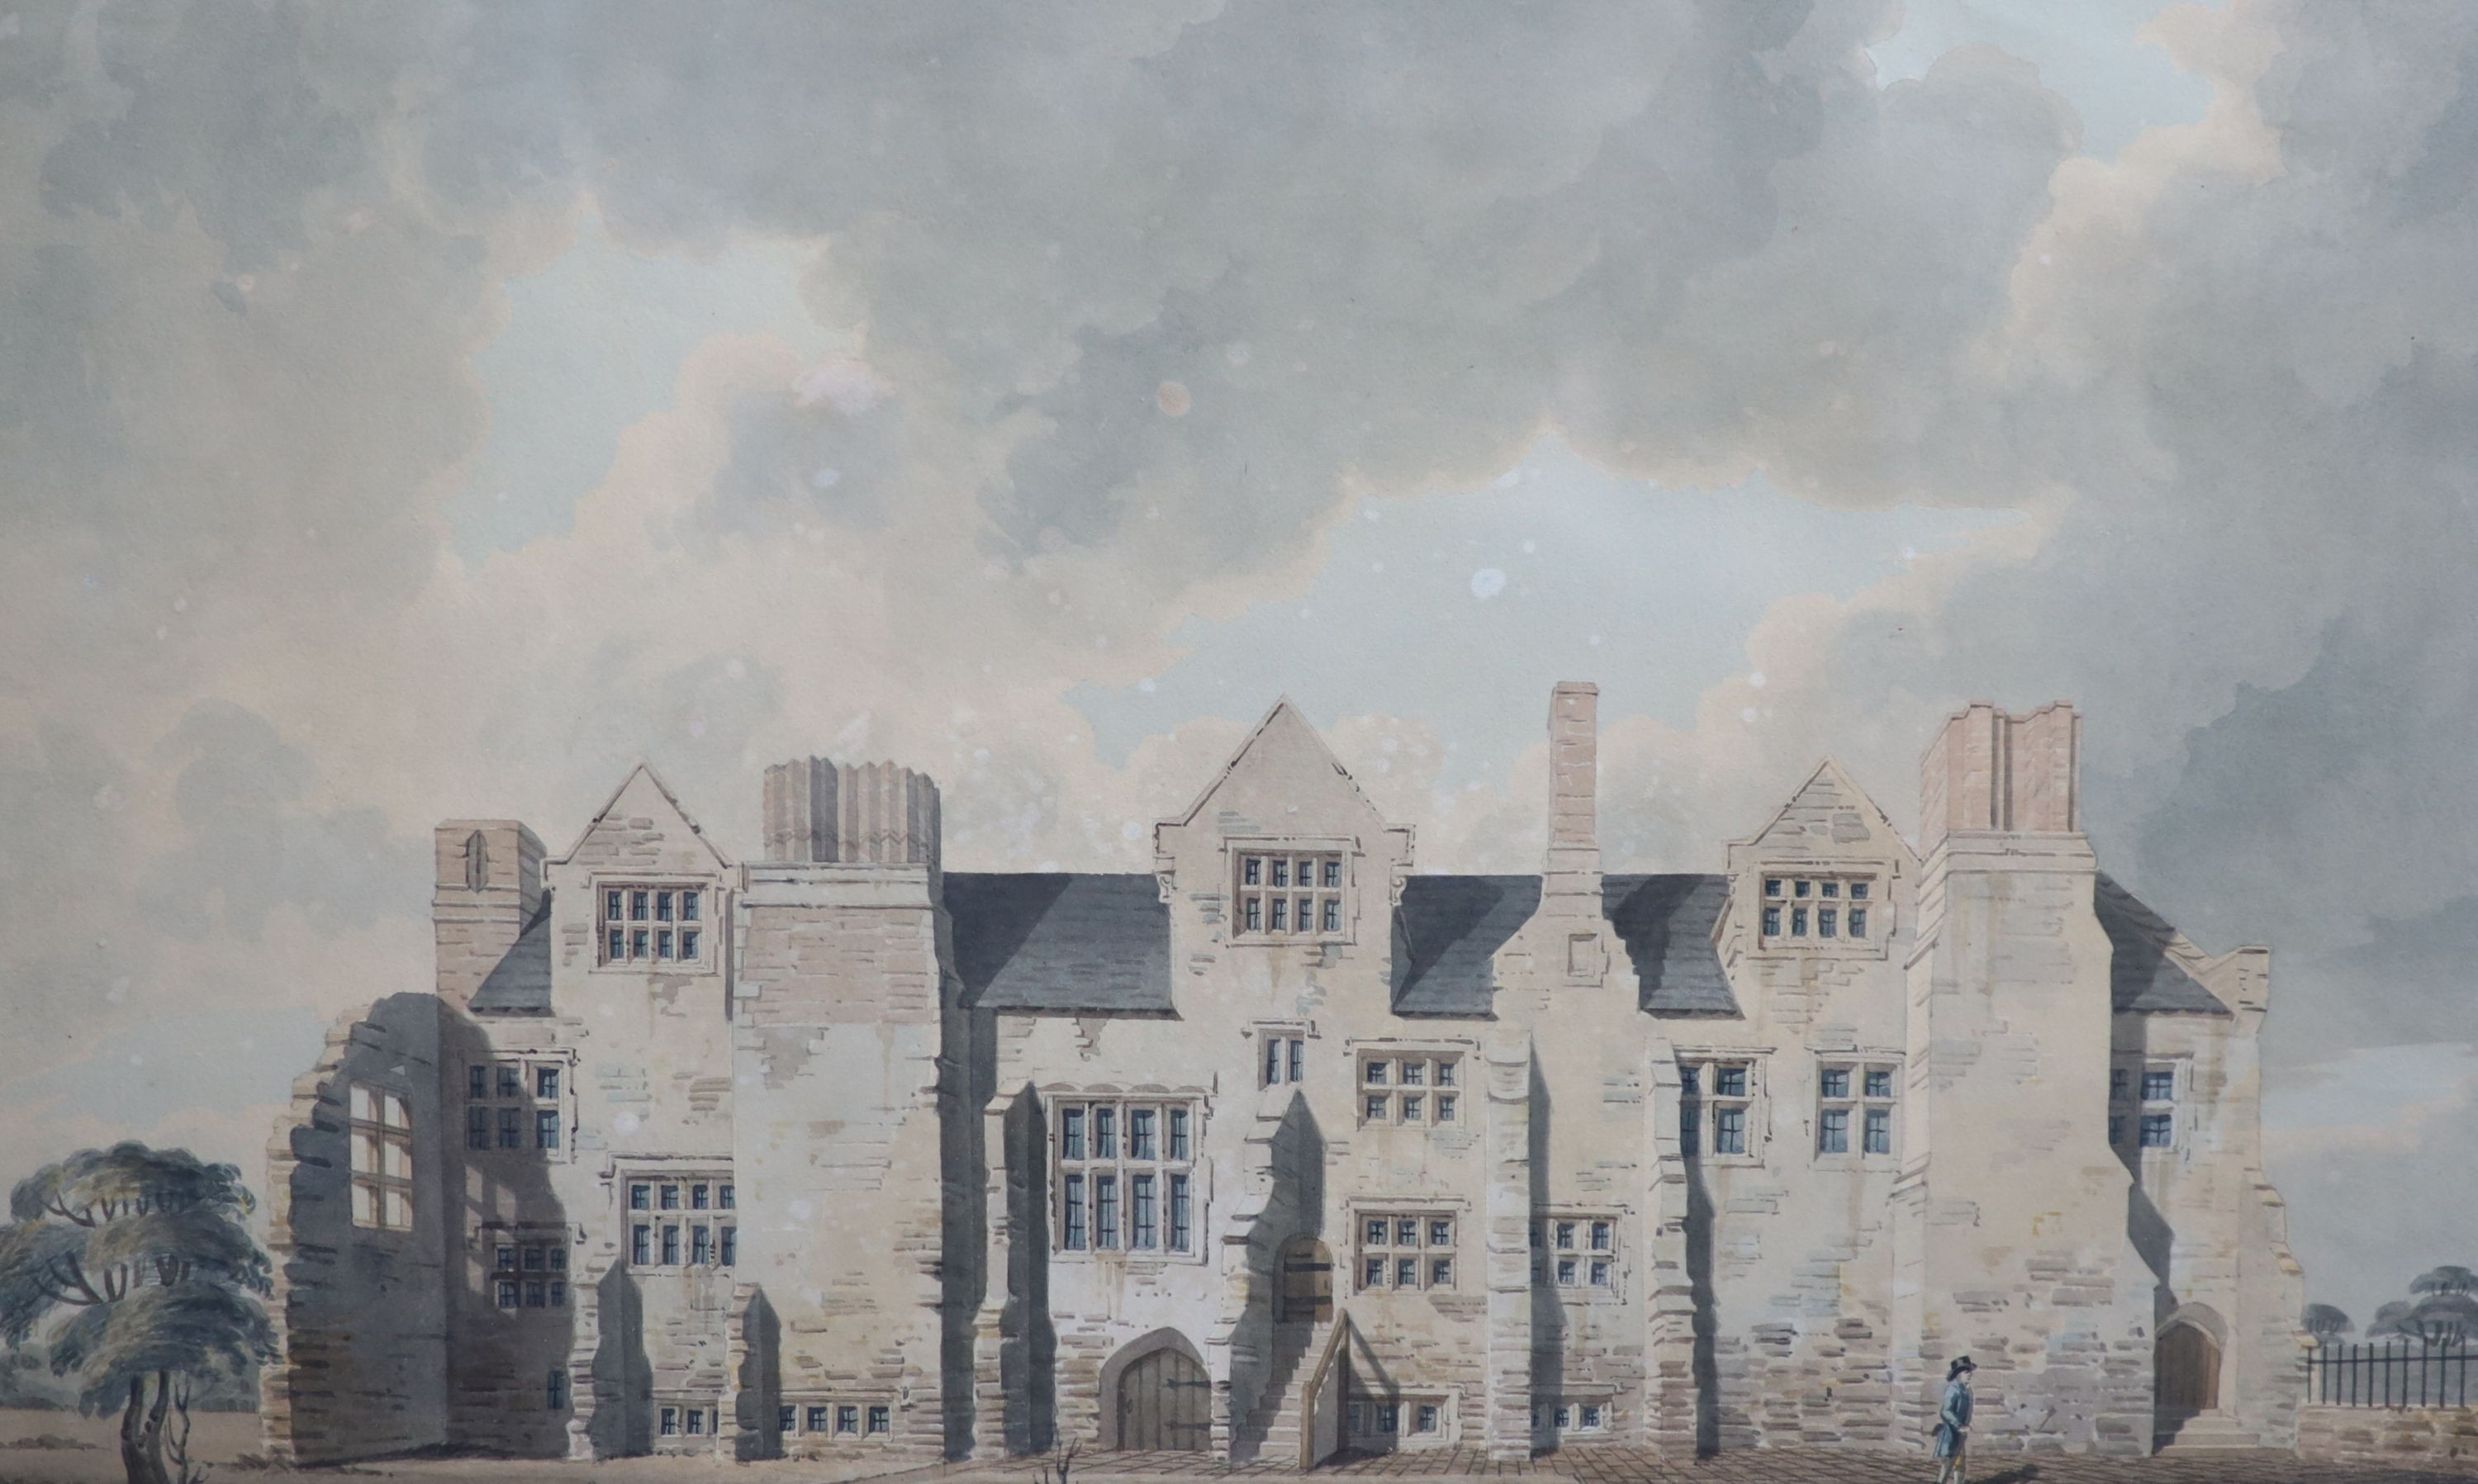 T Athow (fl. 1780-1820), Two elevations of Combwell Priory, Pencil and watercolour, a pair, 31 x 52cm.